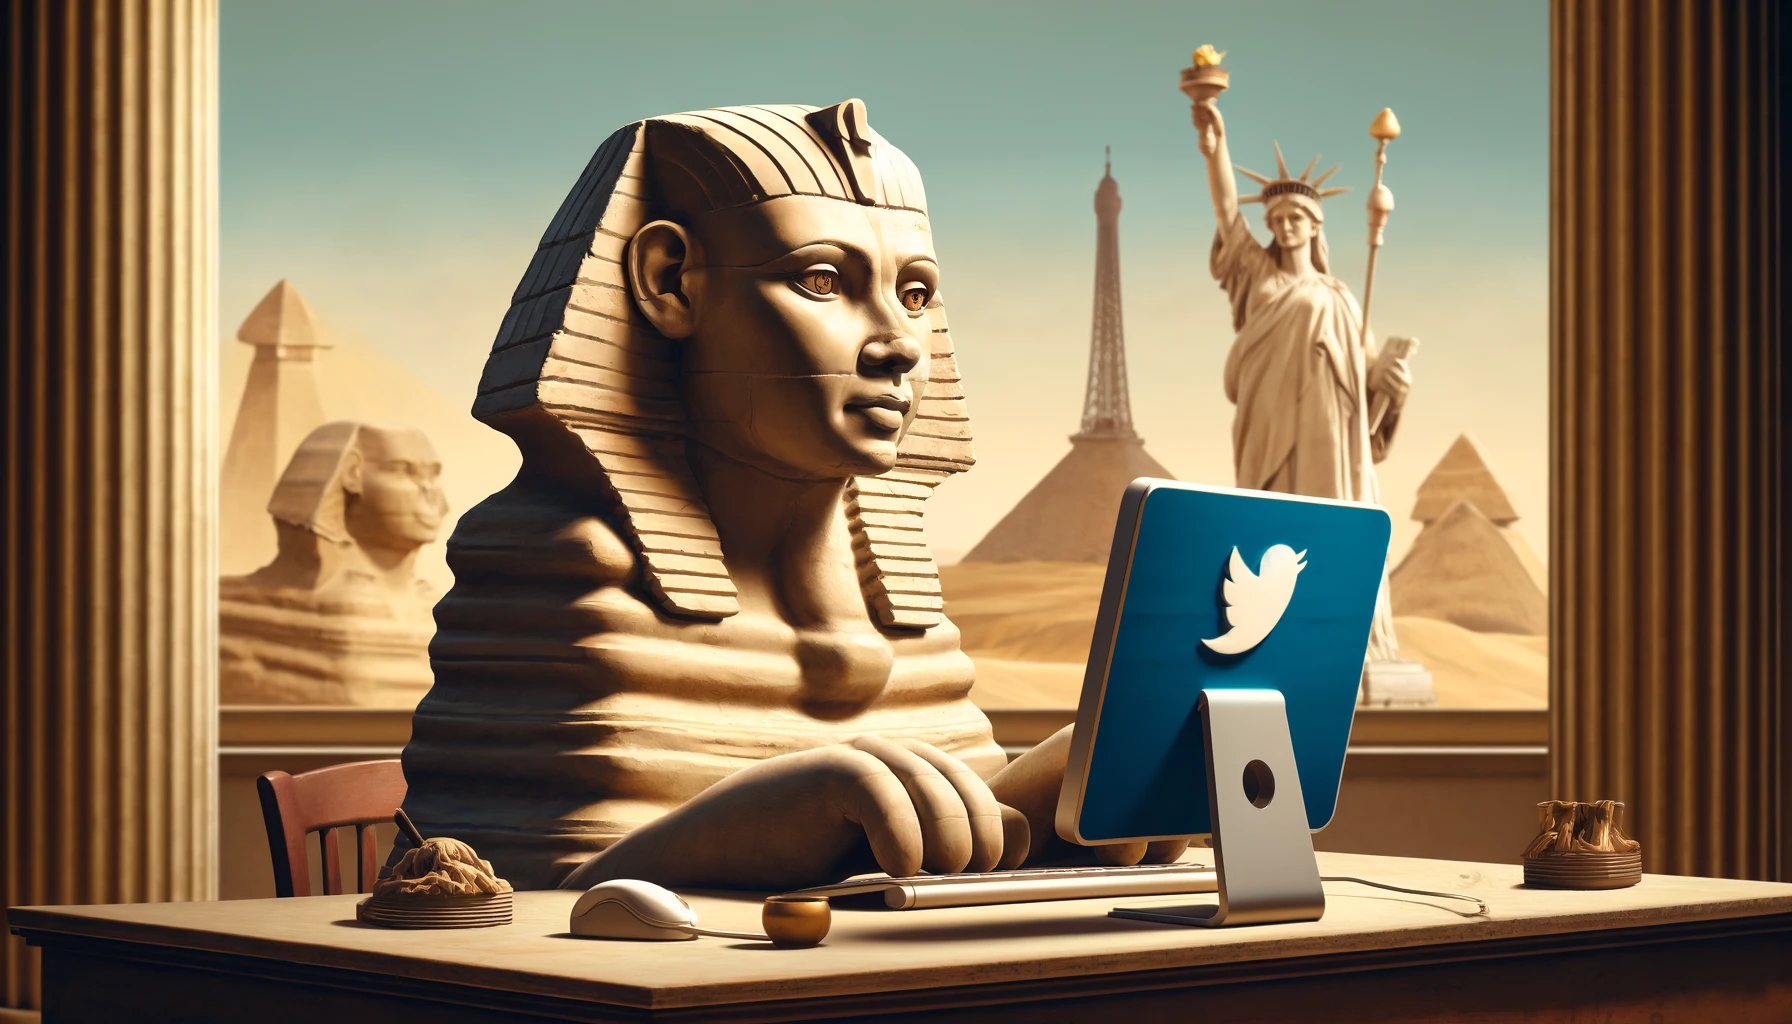 egypt-sphinx-opens-snarky-twitter-account-csdn